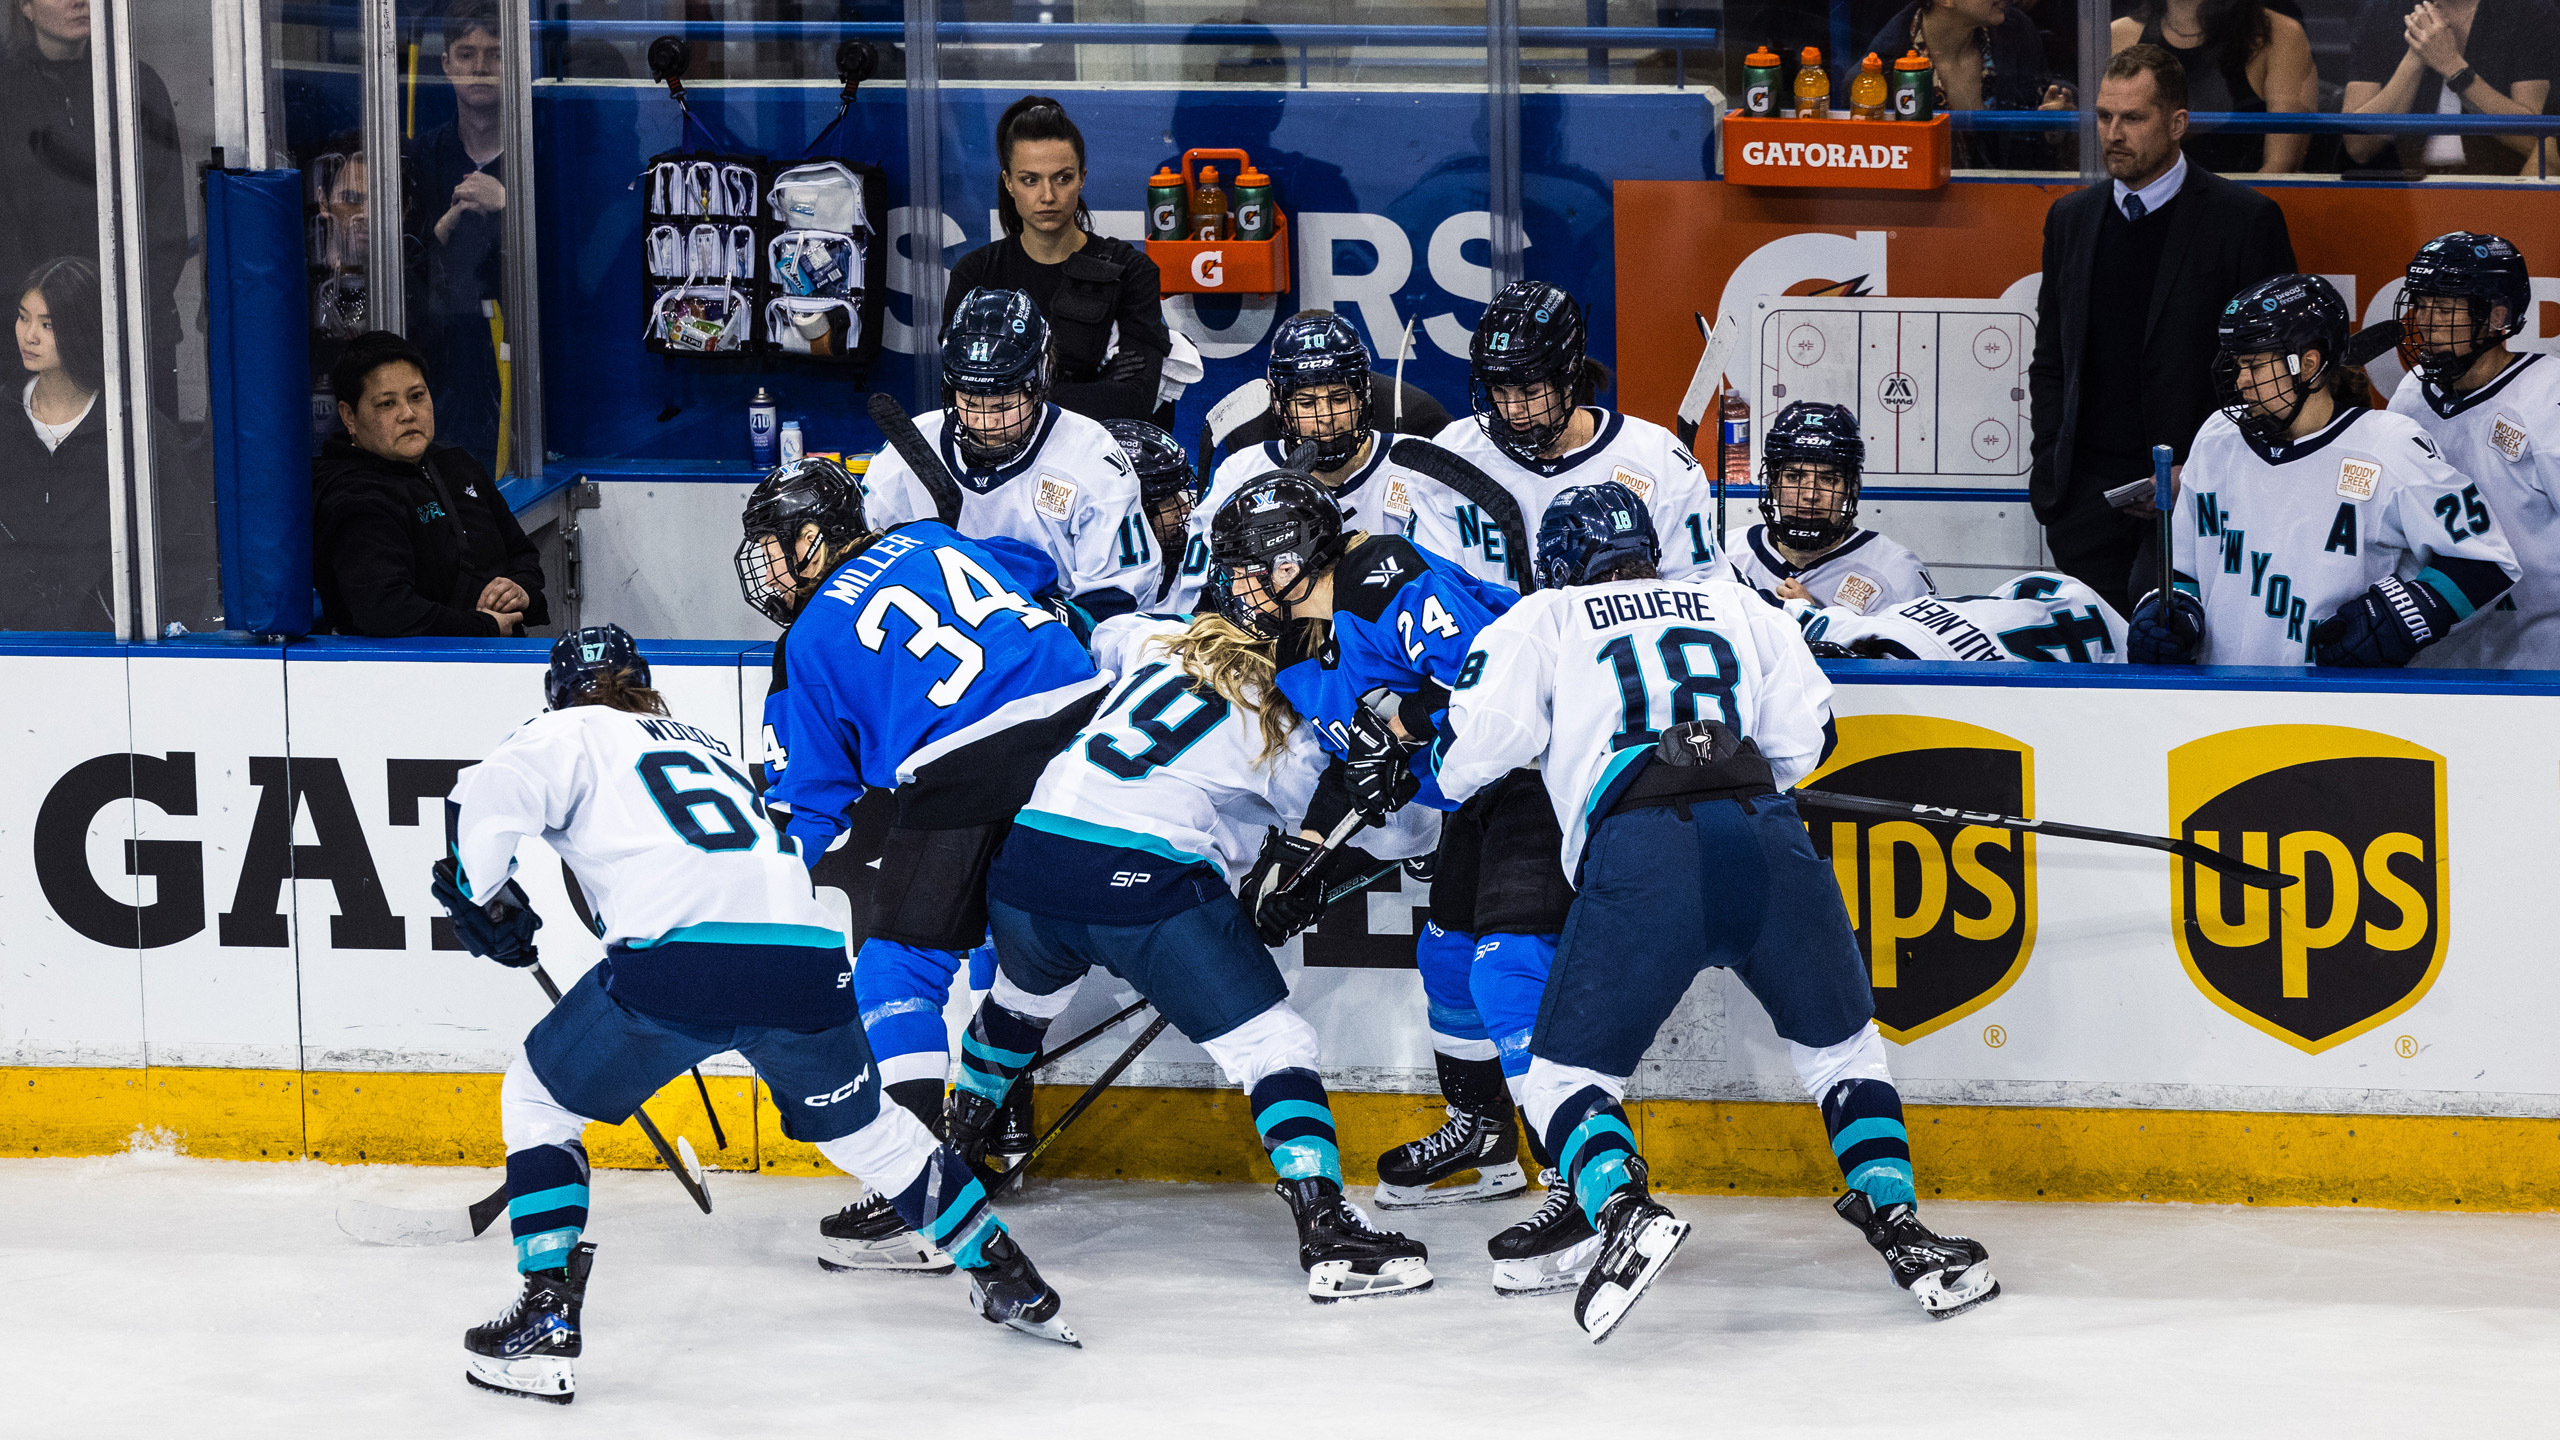 Players from PWHL Toronto and PWHL New York battle for a puck along the boards near New York's bench